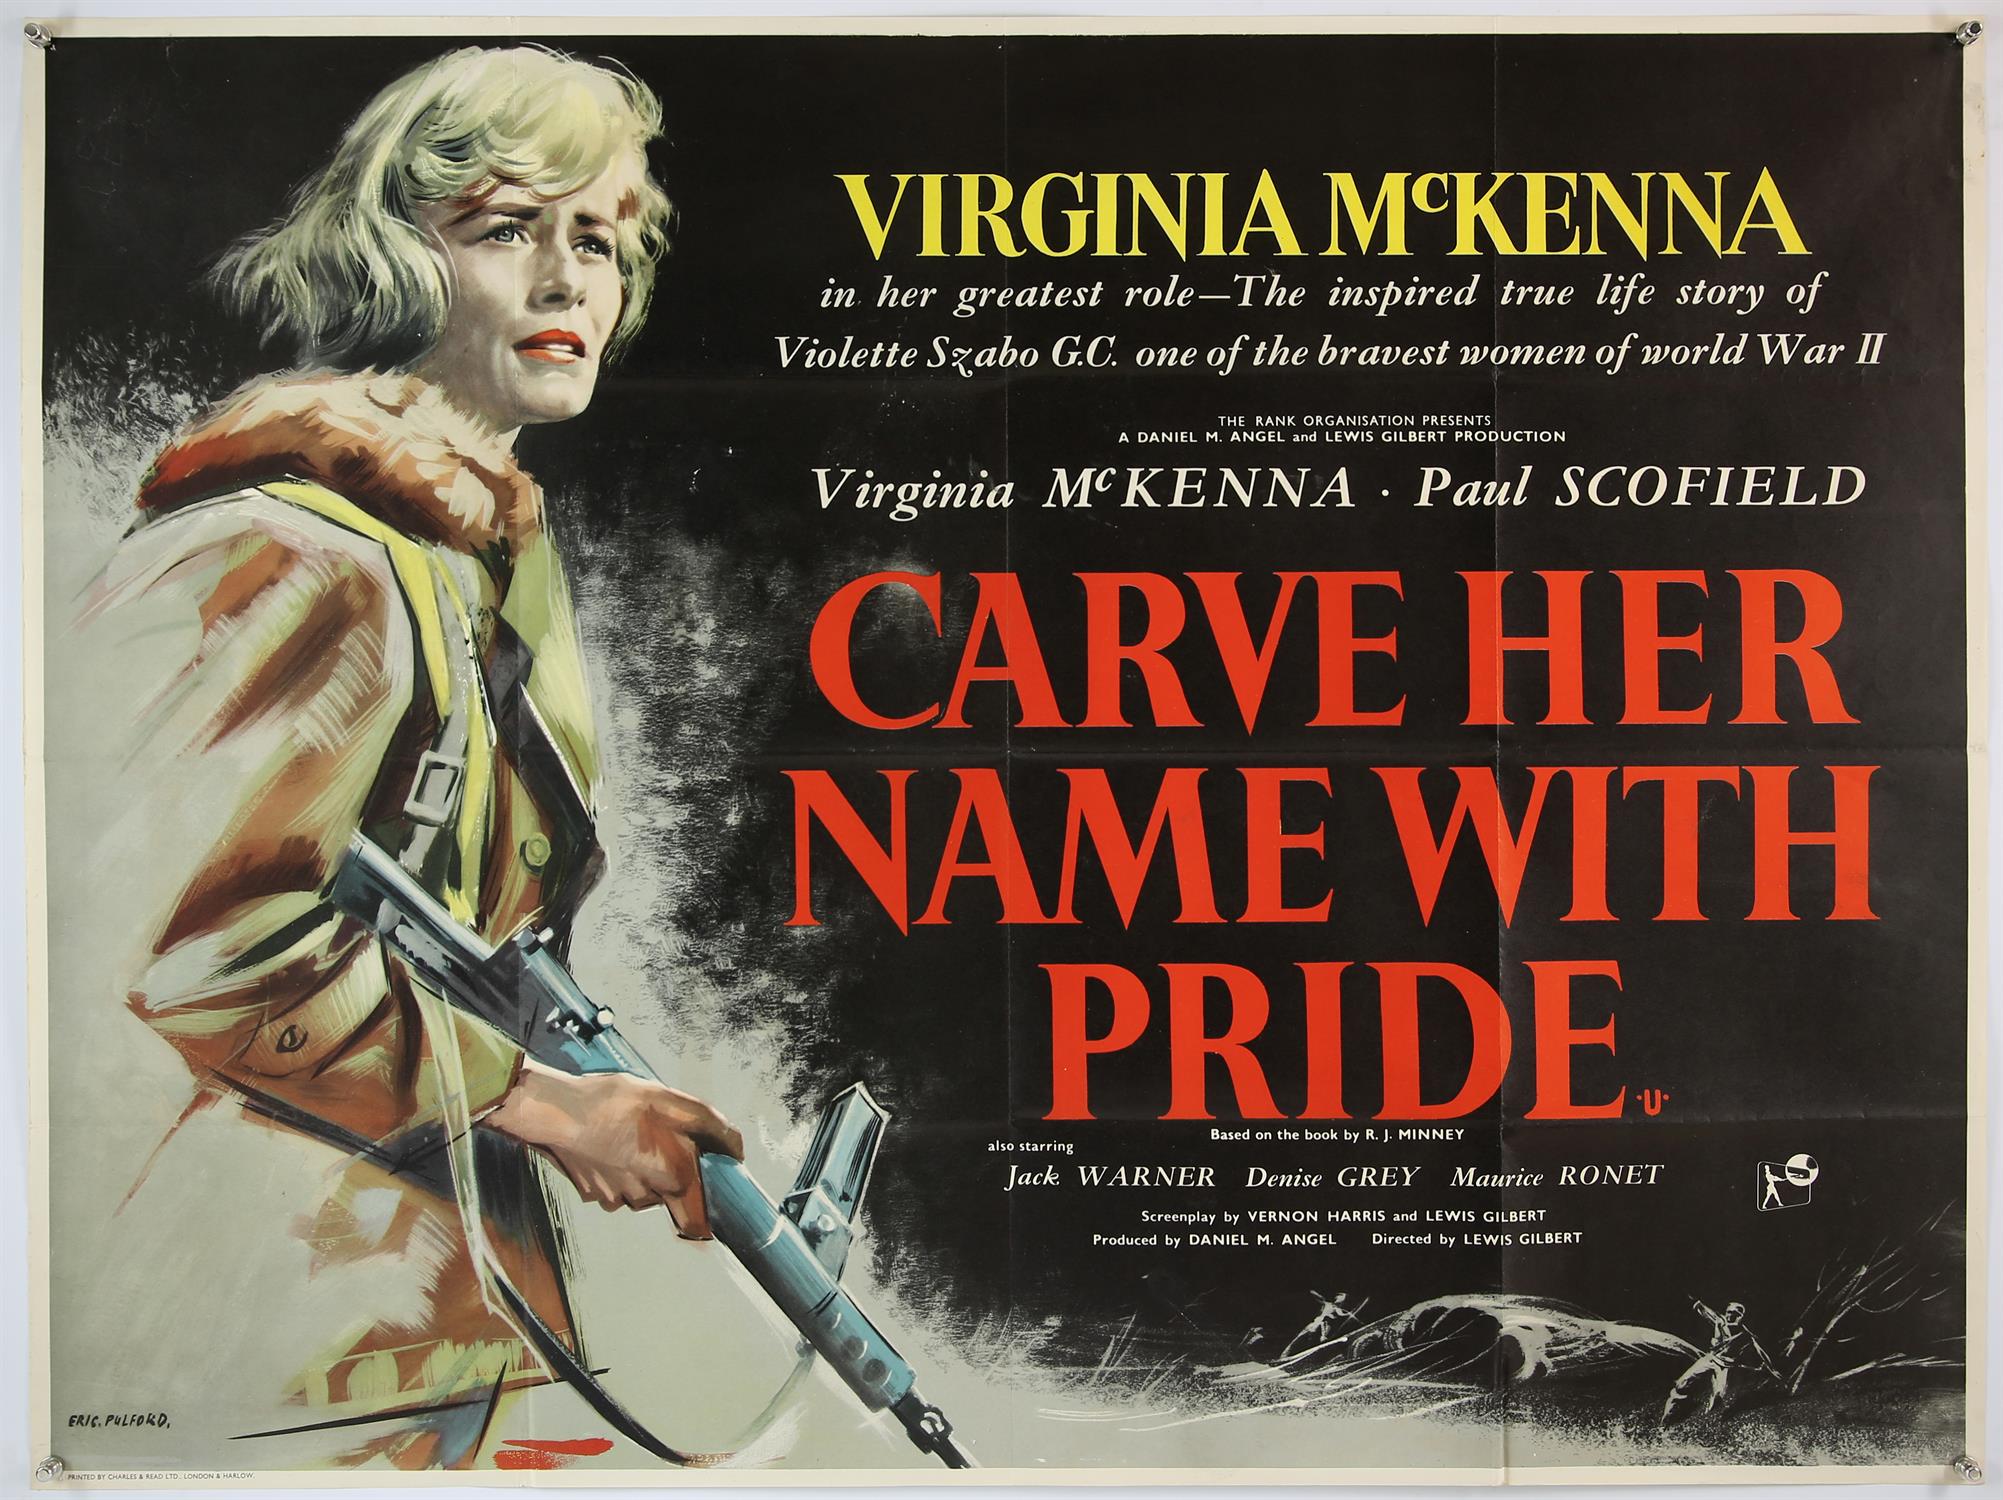 Carve Her Name With Pride (1958) British Quad film poster, starring Virginia McKenna and Paul